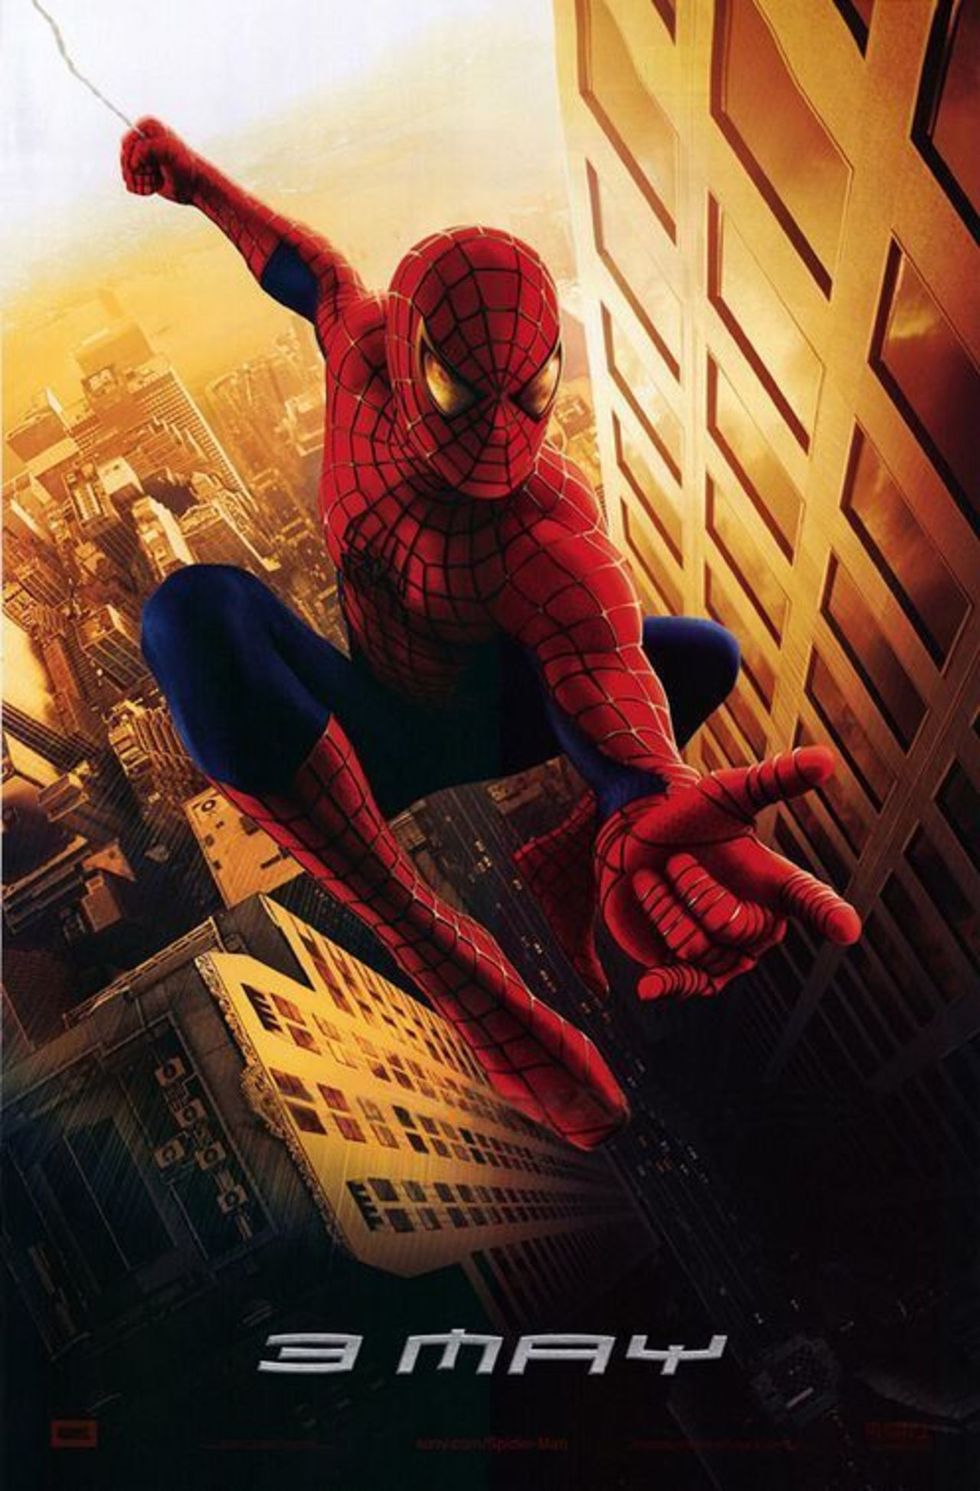 Web of Production: The Failed Spider-Man Films